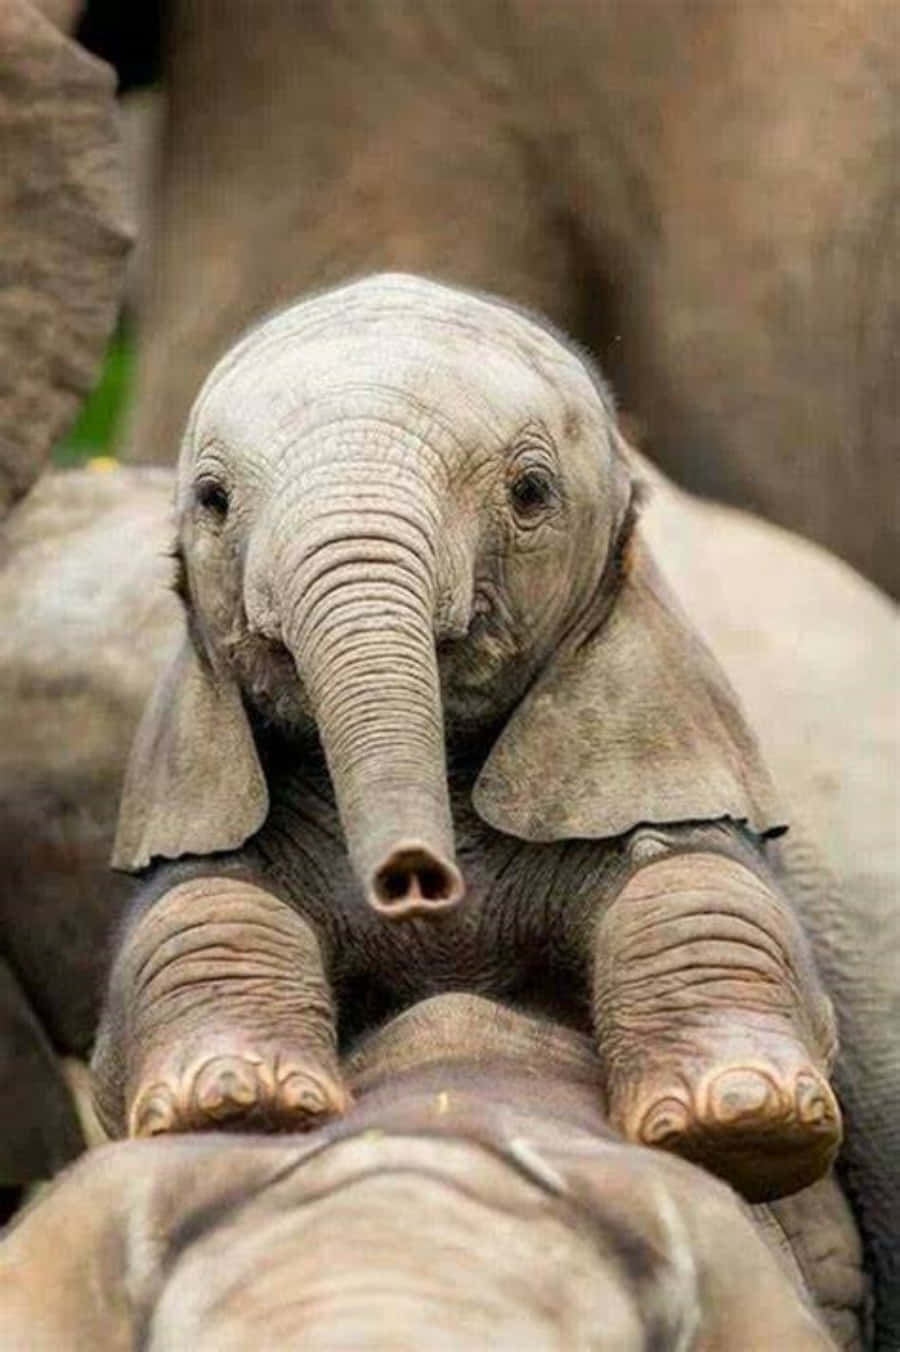 A Sweet and Cheerful Elephant